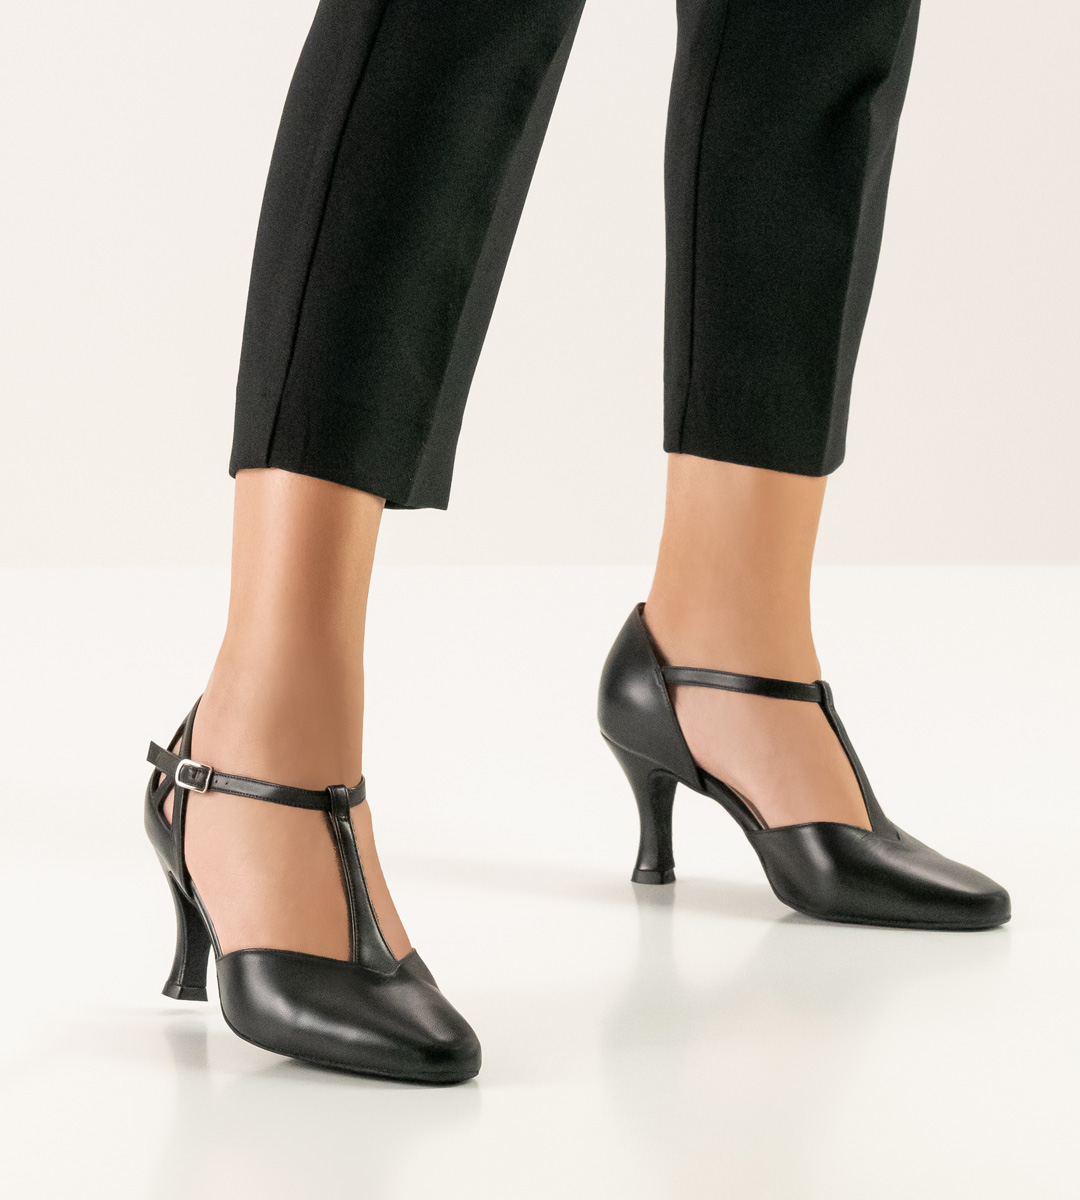 closed Werner Kern ladies dance shoe in black in combination with black trousers